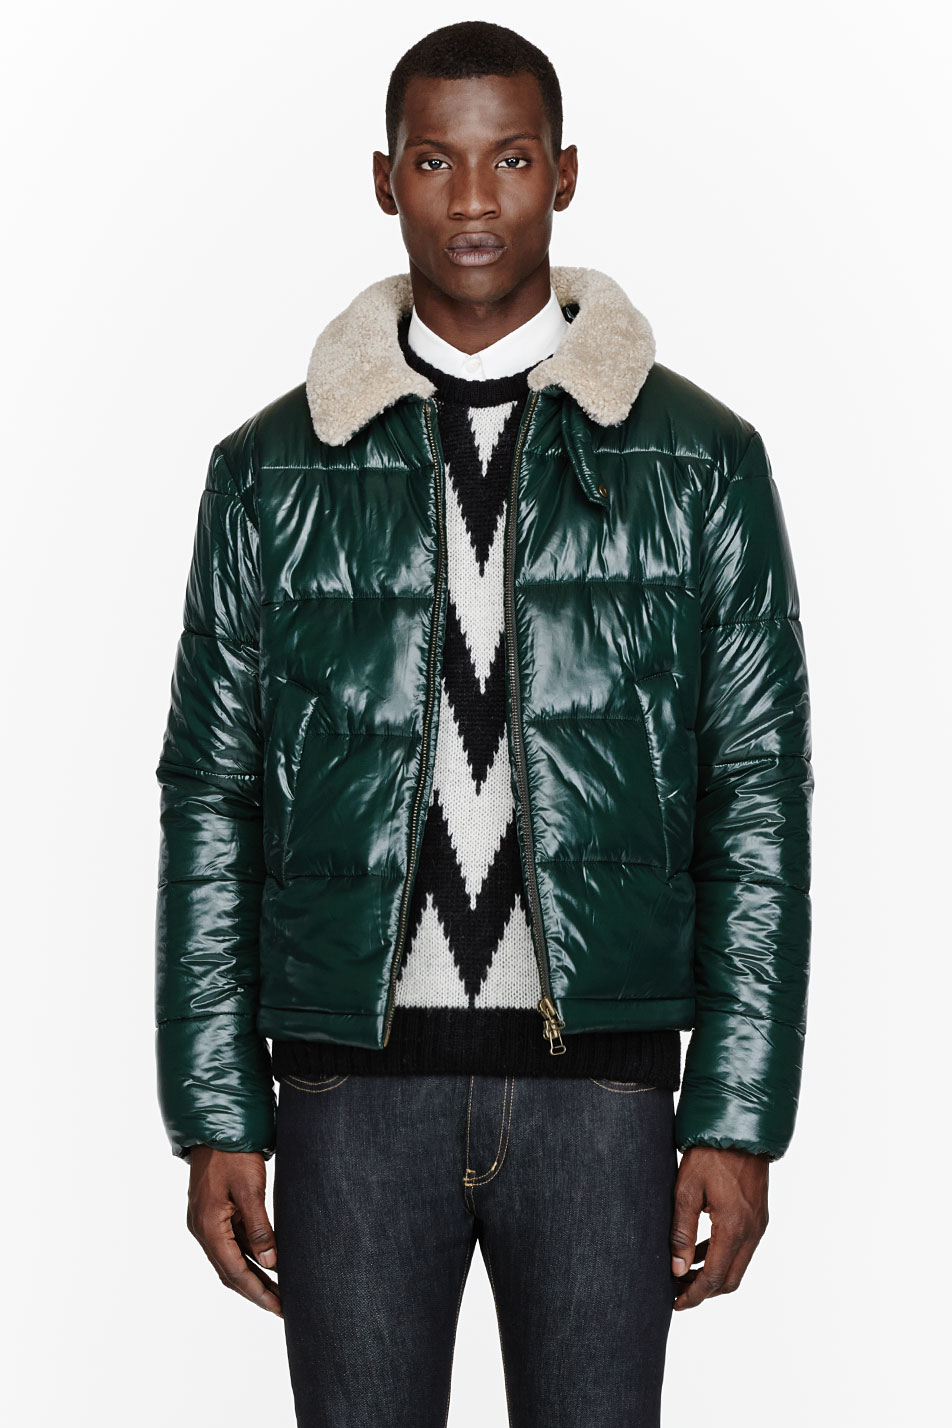 Go Green with Fall's Emerald Trend – The Fashionisto